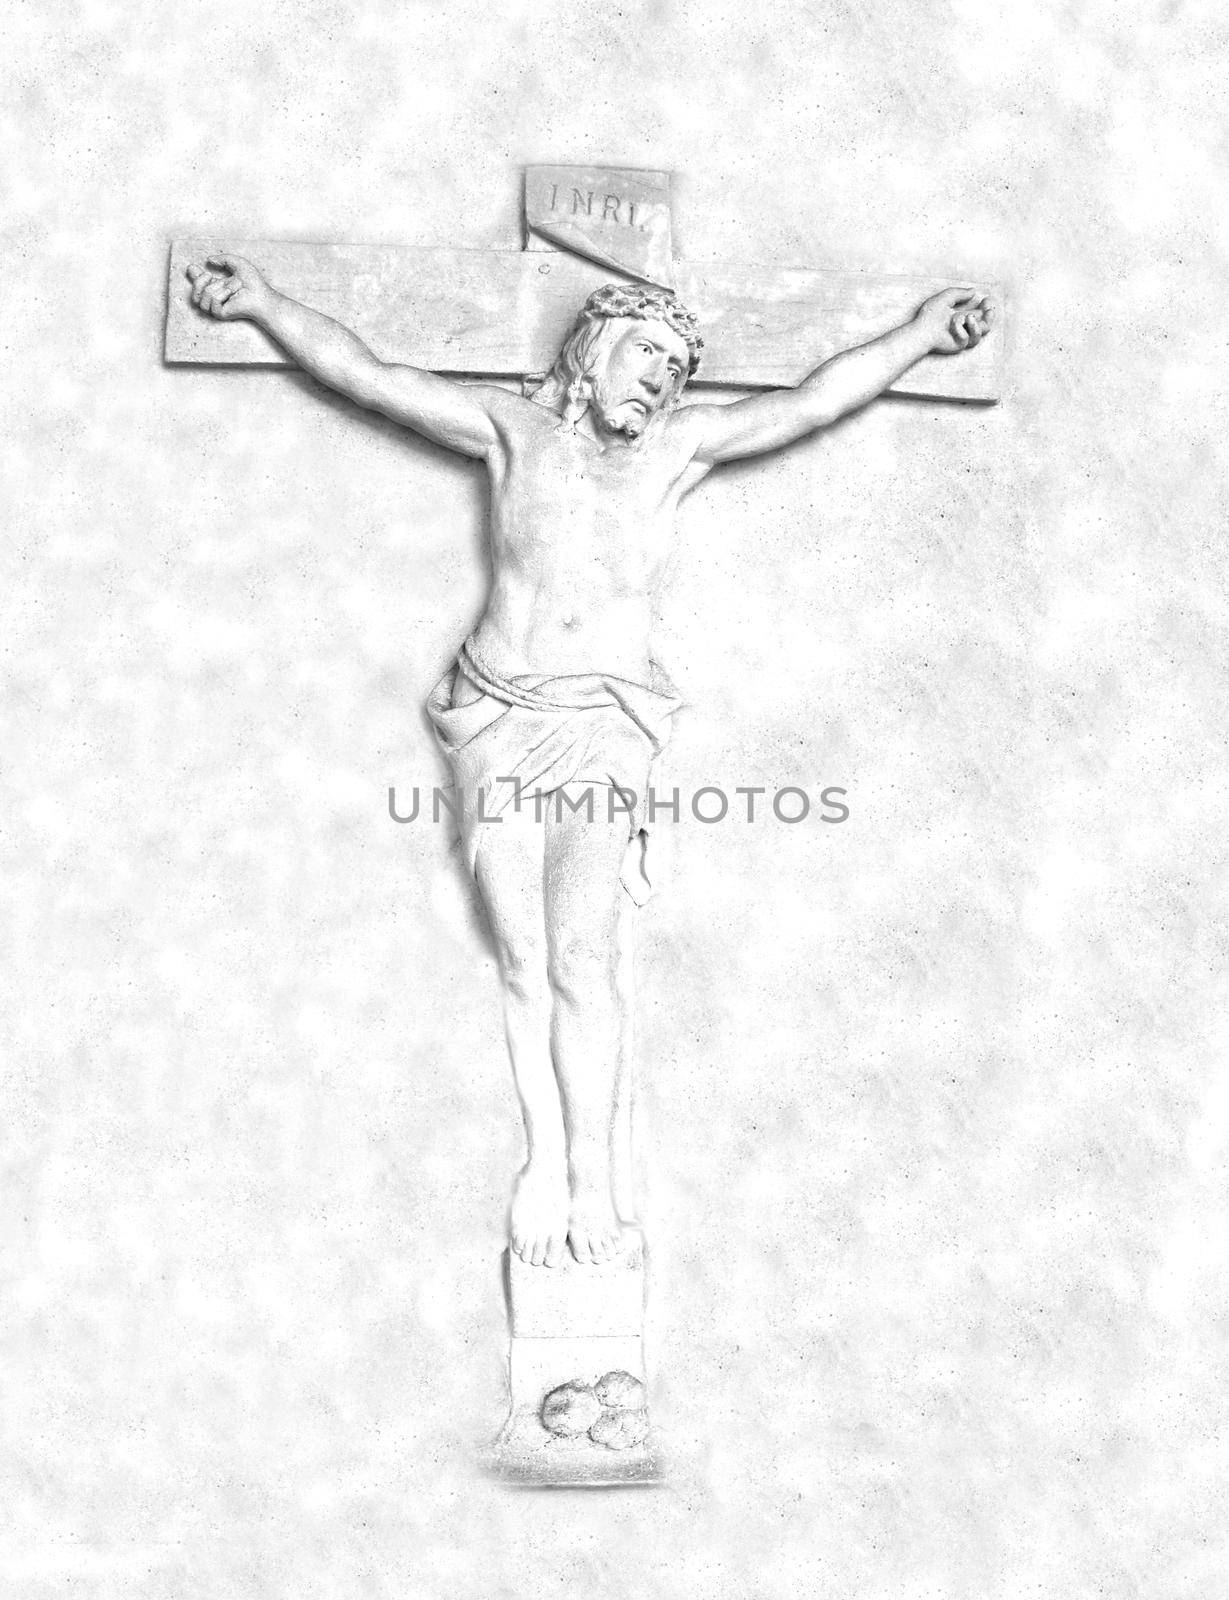 Crucifixion and resurrection of Jesus Christ on the cross by JackyBrown